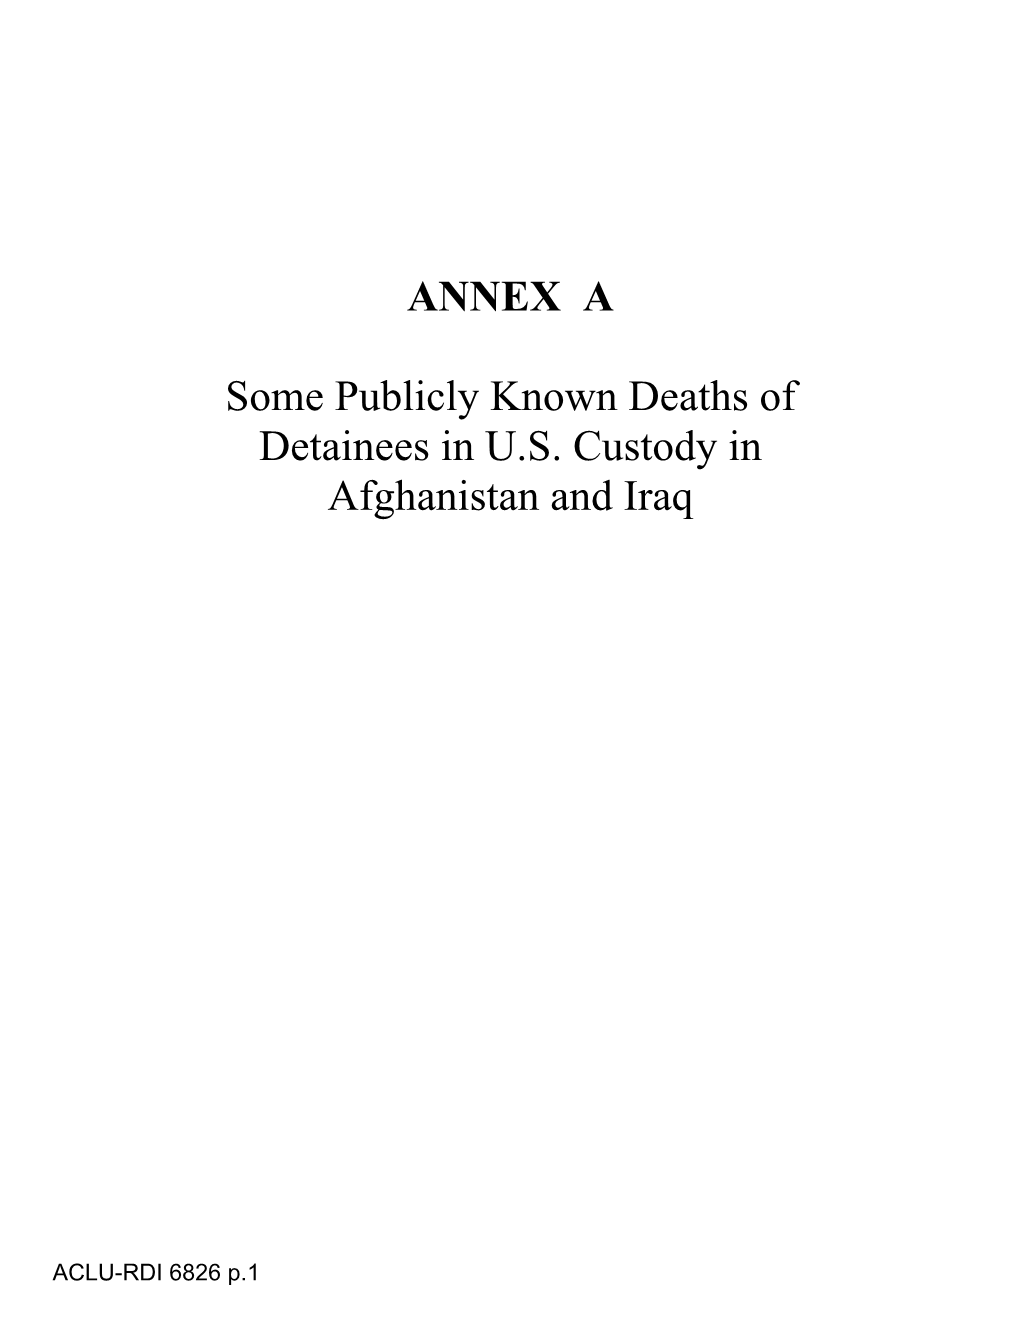 ANNEX a Some Publicly Known Deaths of Detainees in U.S